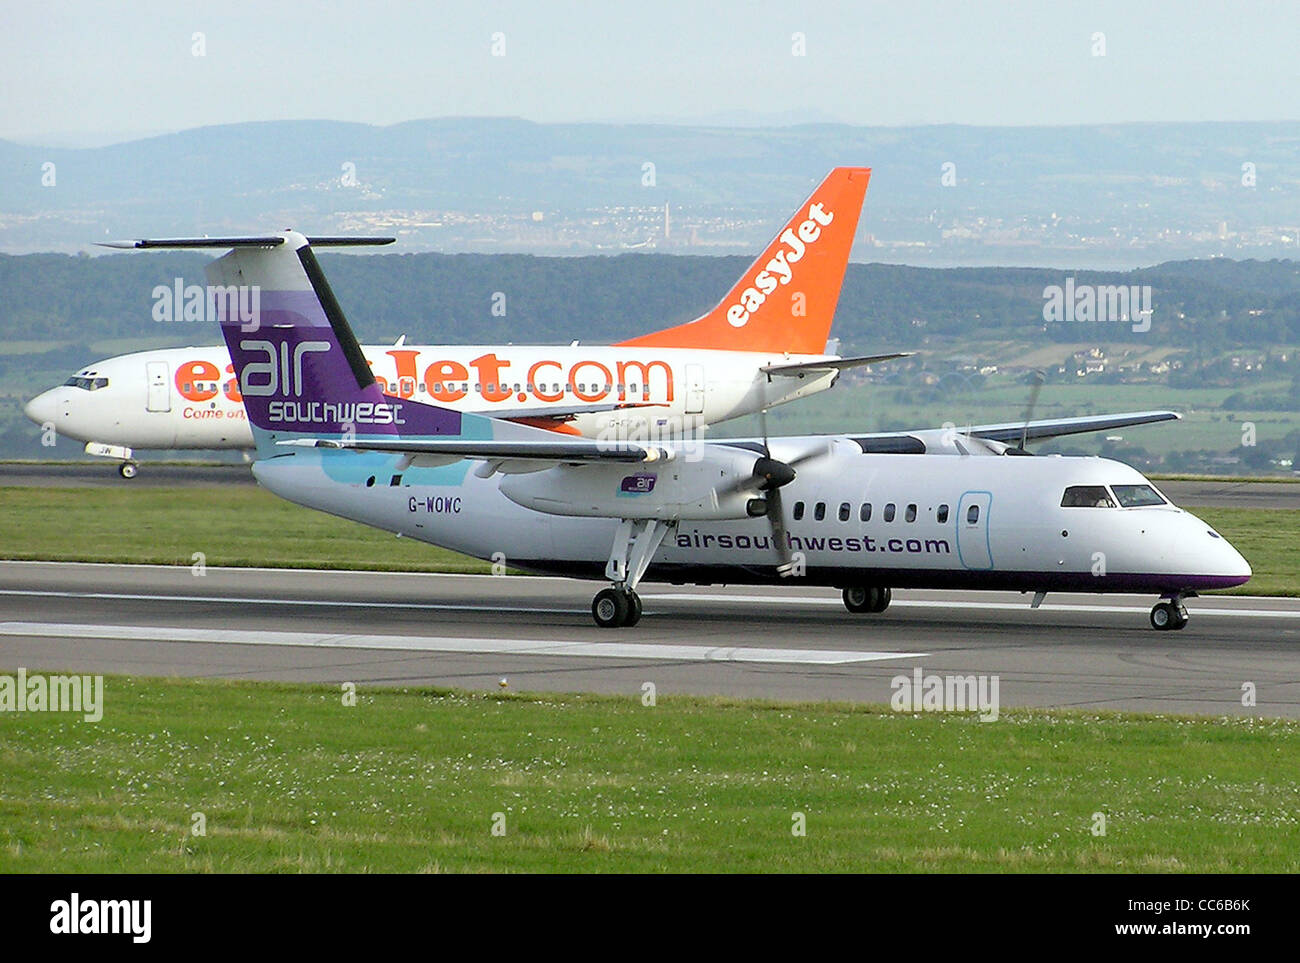 Two aircraft at Bristol International Airport, Bristol, England. The orange easyJet queueing for take off is Boeing 737-700 G-EZJW. The propeller aircraft starting take off is Air Southwest de Havilland Dash 8, G-WOWC. Stock Photo